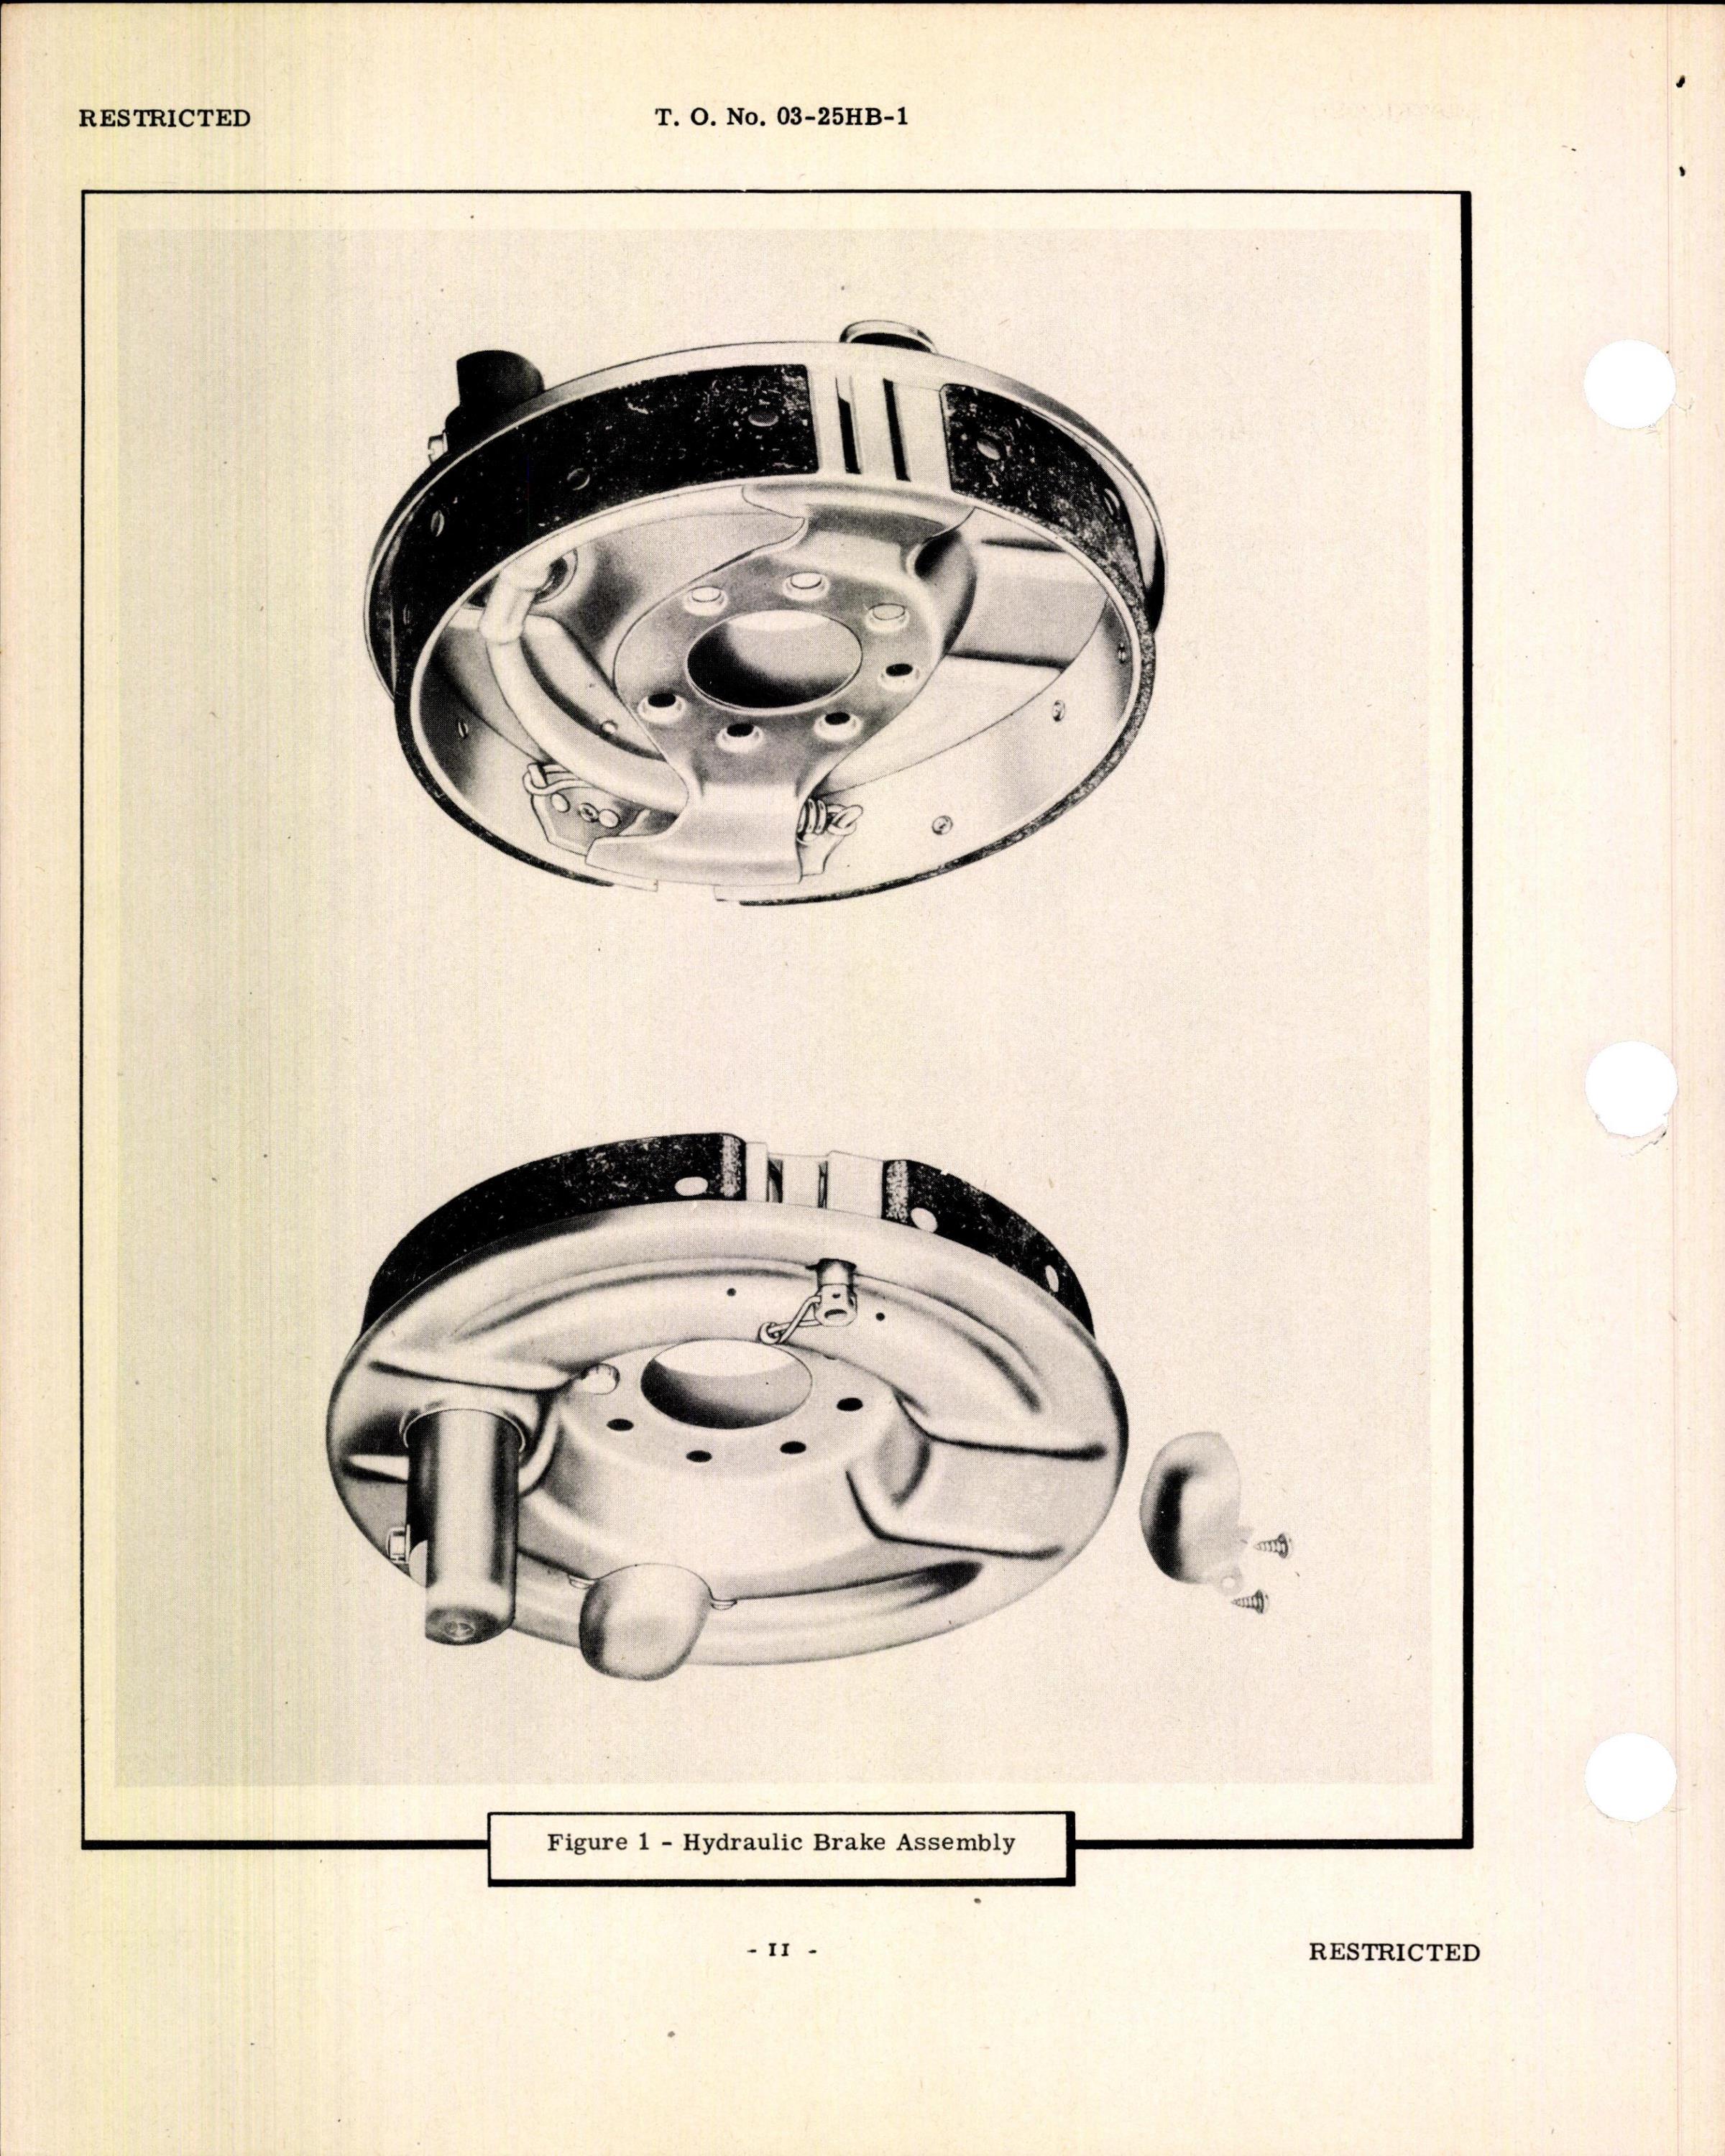 Sample page 4 from AirCorps Library document: Handbook of Instructions for Hydraulic Brake Assembly